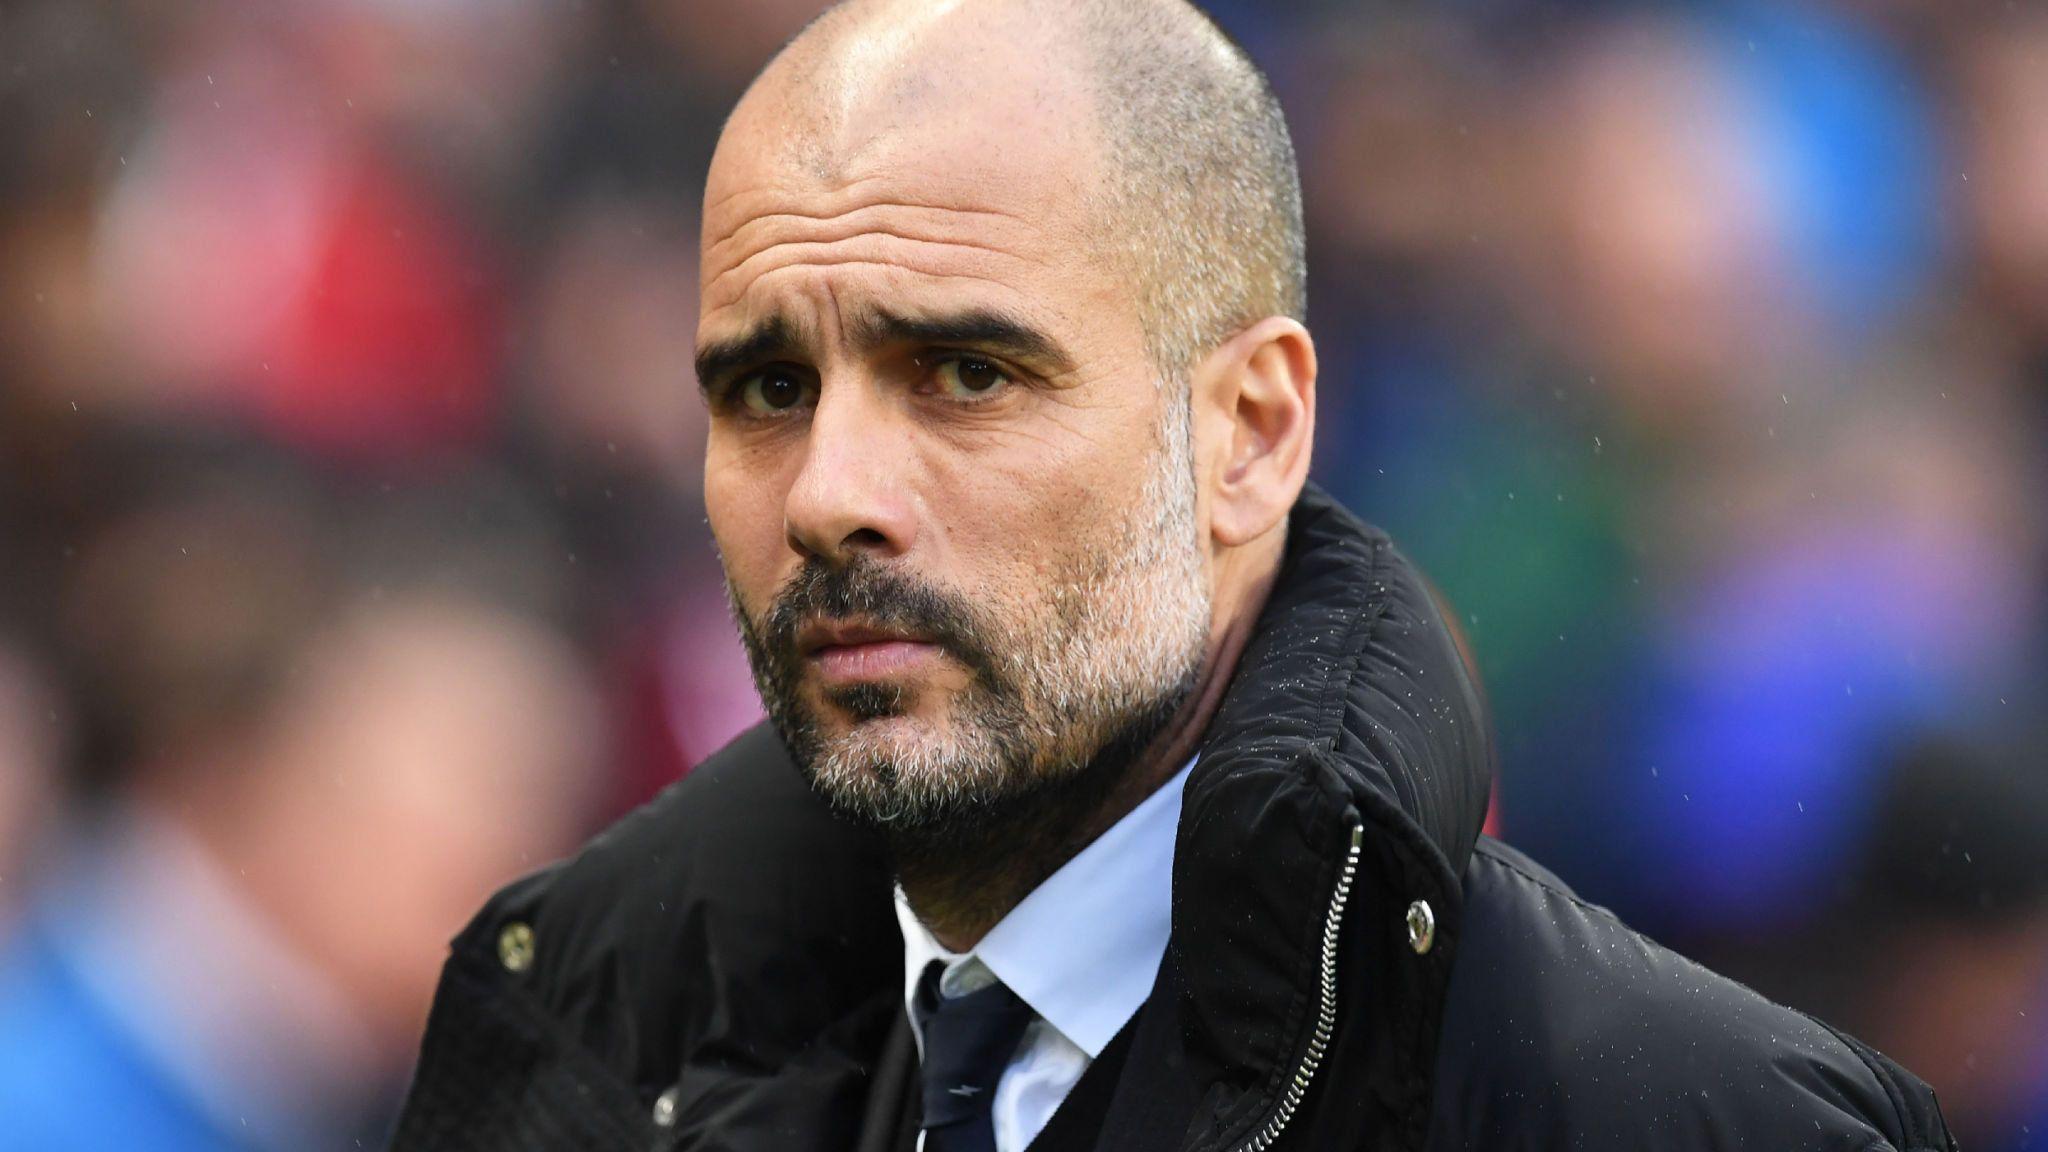 Manchester City haven't progressed under Pep Guardiola, says